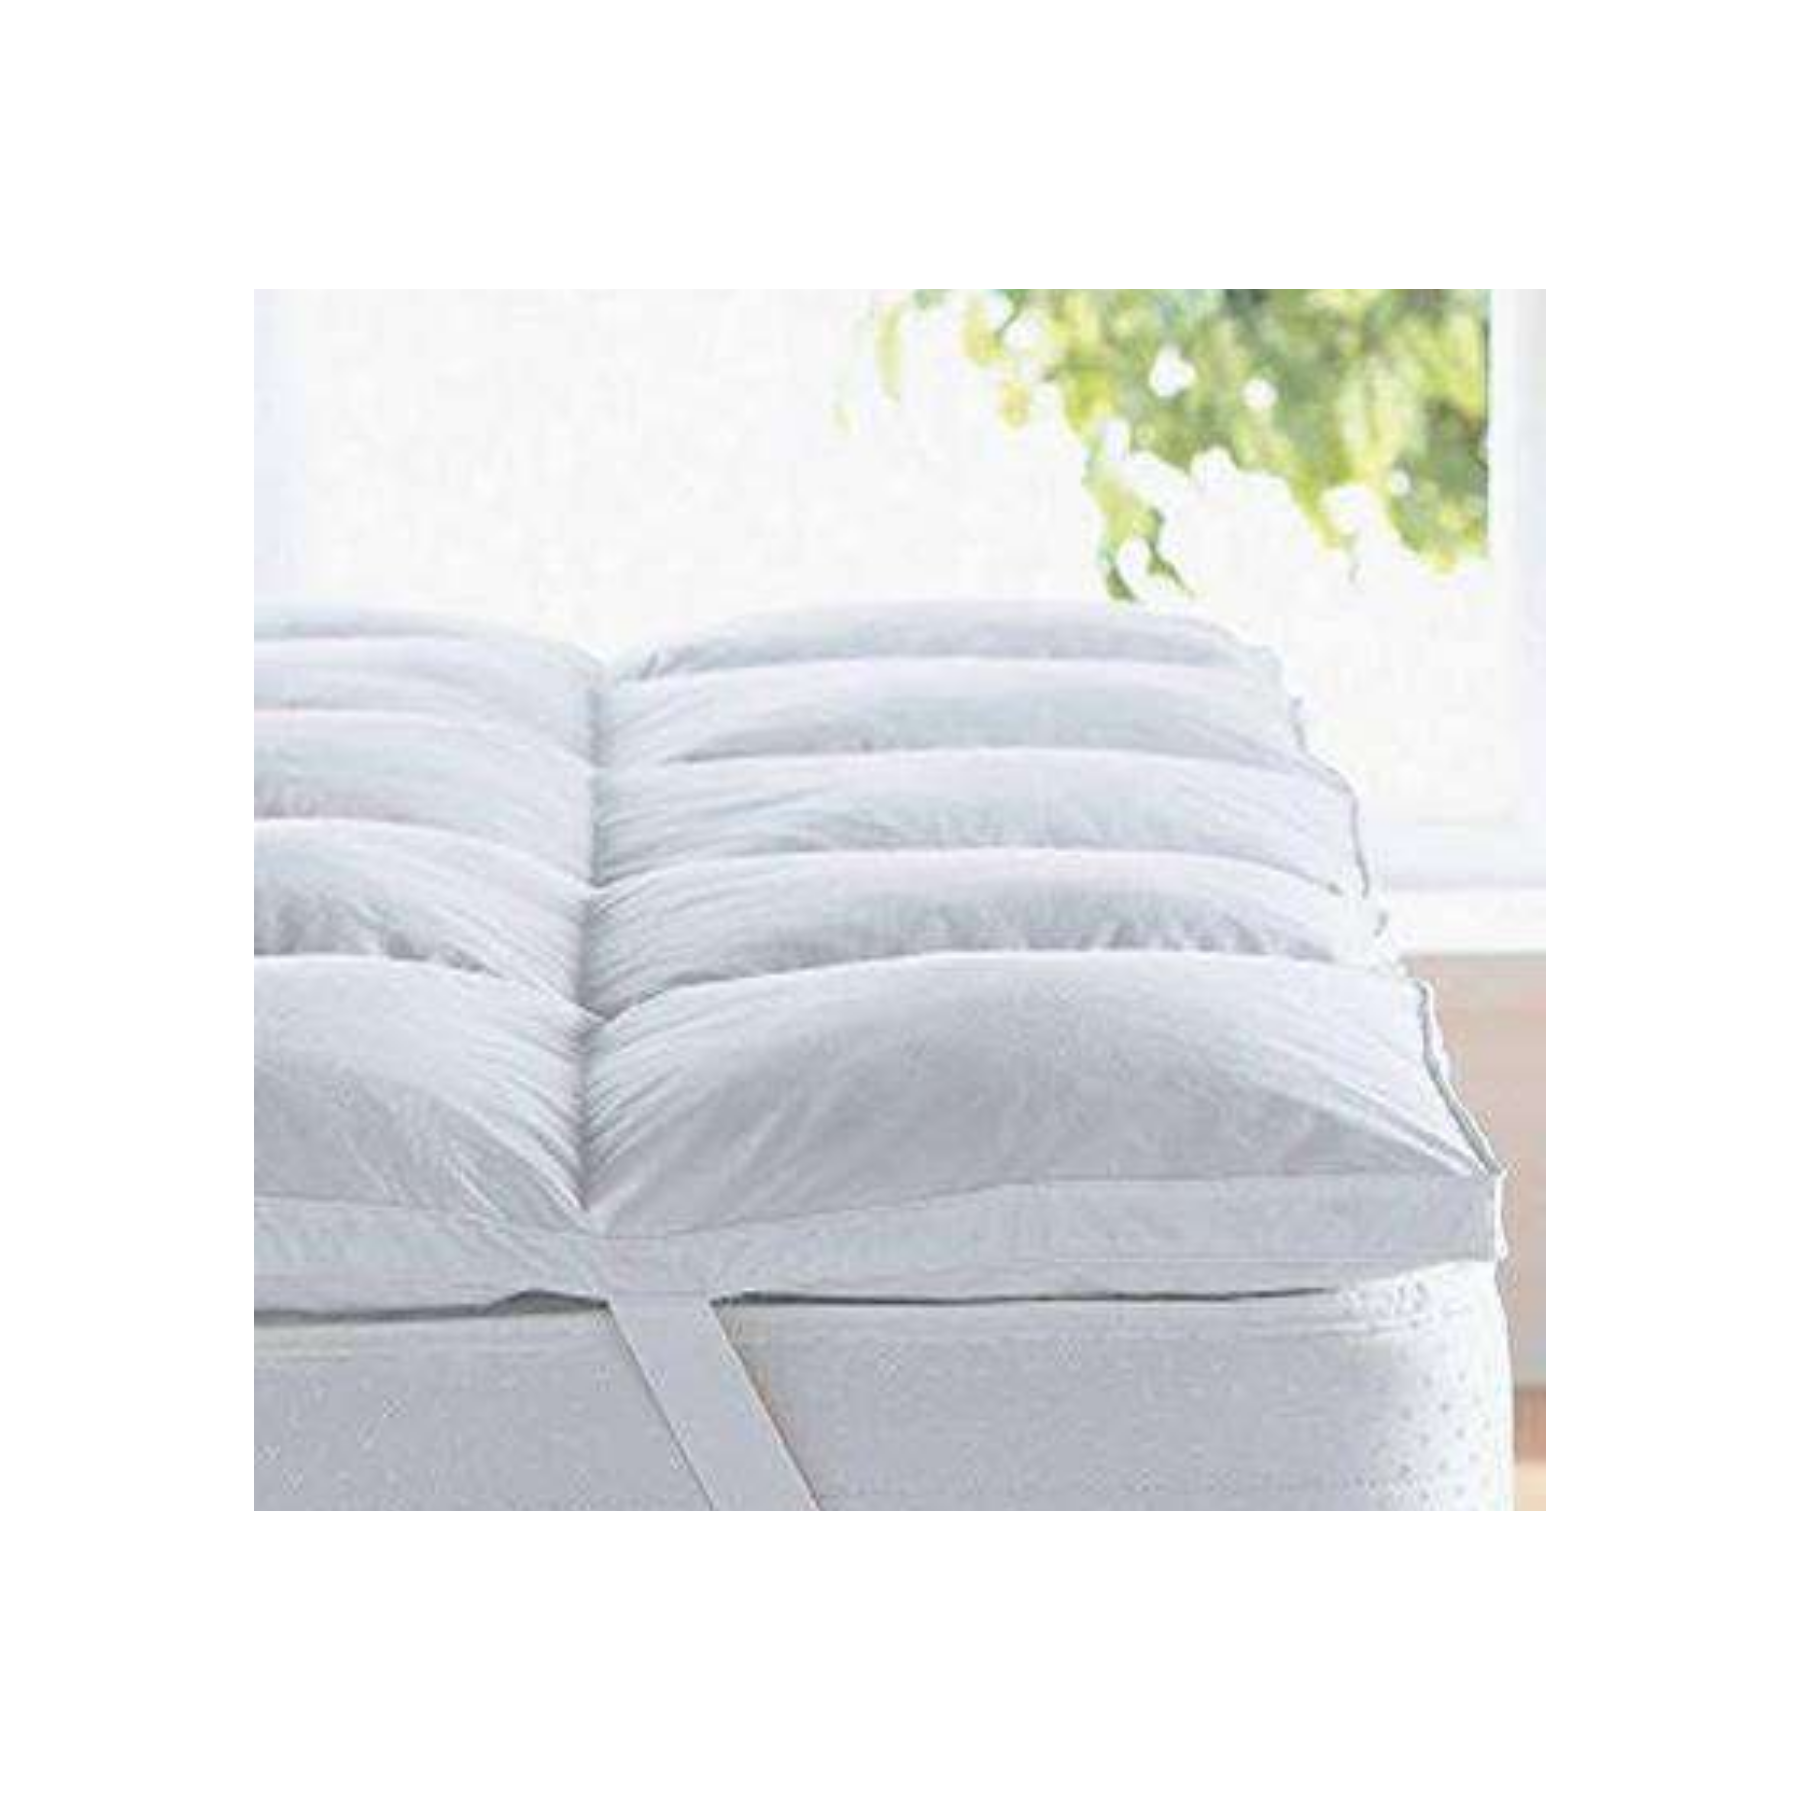 Free shipping on this Double Size Plush Goose Mattress Topper